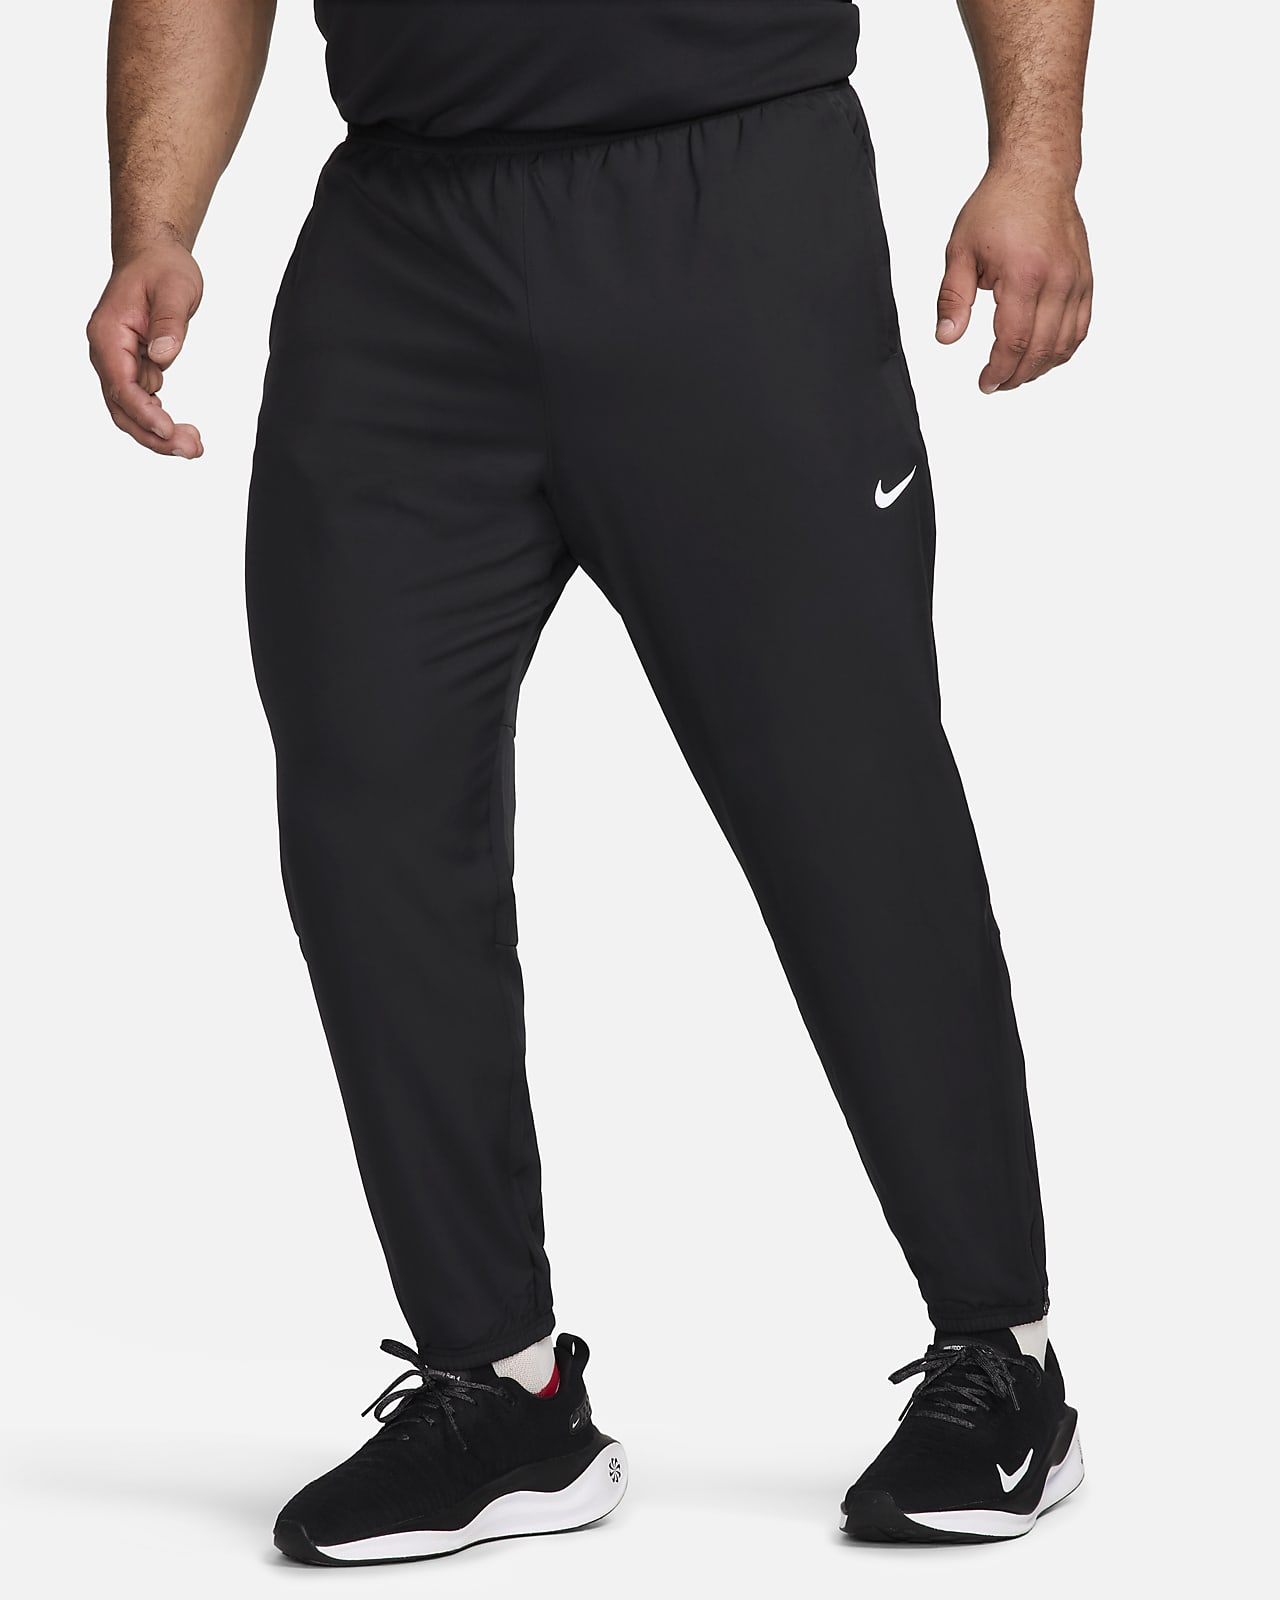 Nike Dri-FIT Challenger Men's Knit Running Trousers. Nike SI